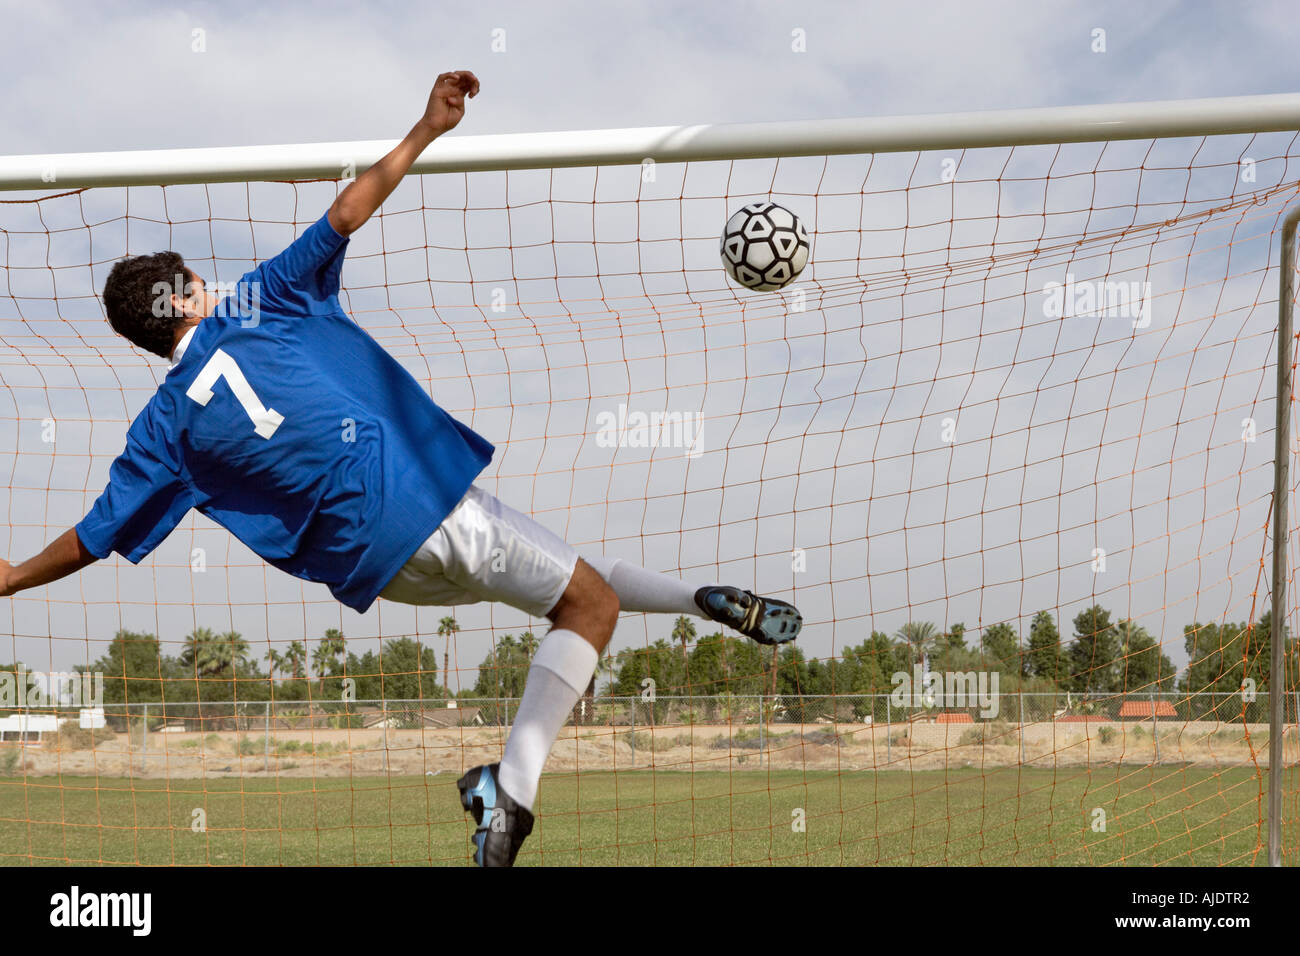 Soccer Player Happy Scoring A Goal Stock Photo - Download Image Now -  Soccer, Athlete, Soccer Player - iStock